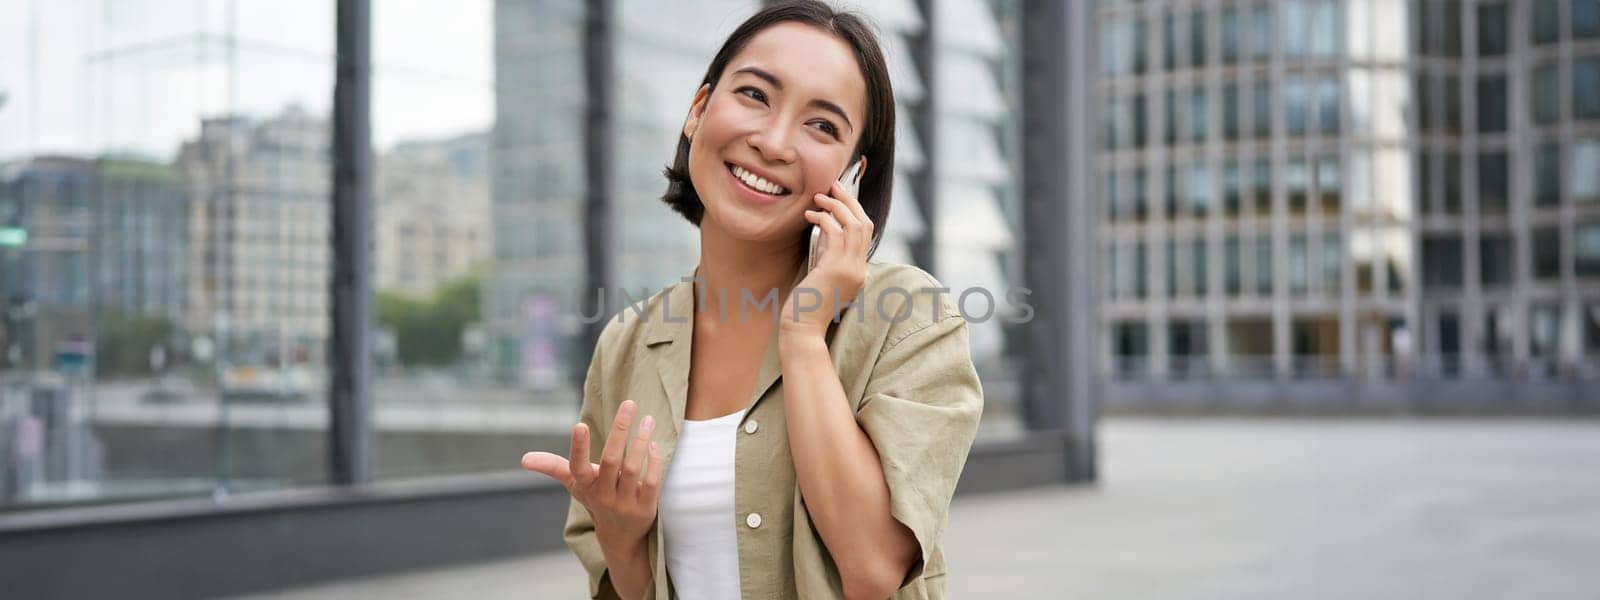 Cellular connection. Young asian woman makes a telephone call, talking on mobile smartphone and walking on street.